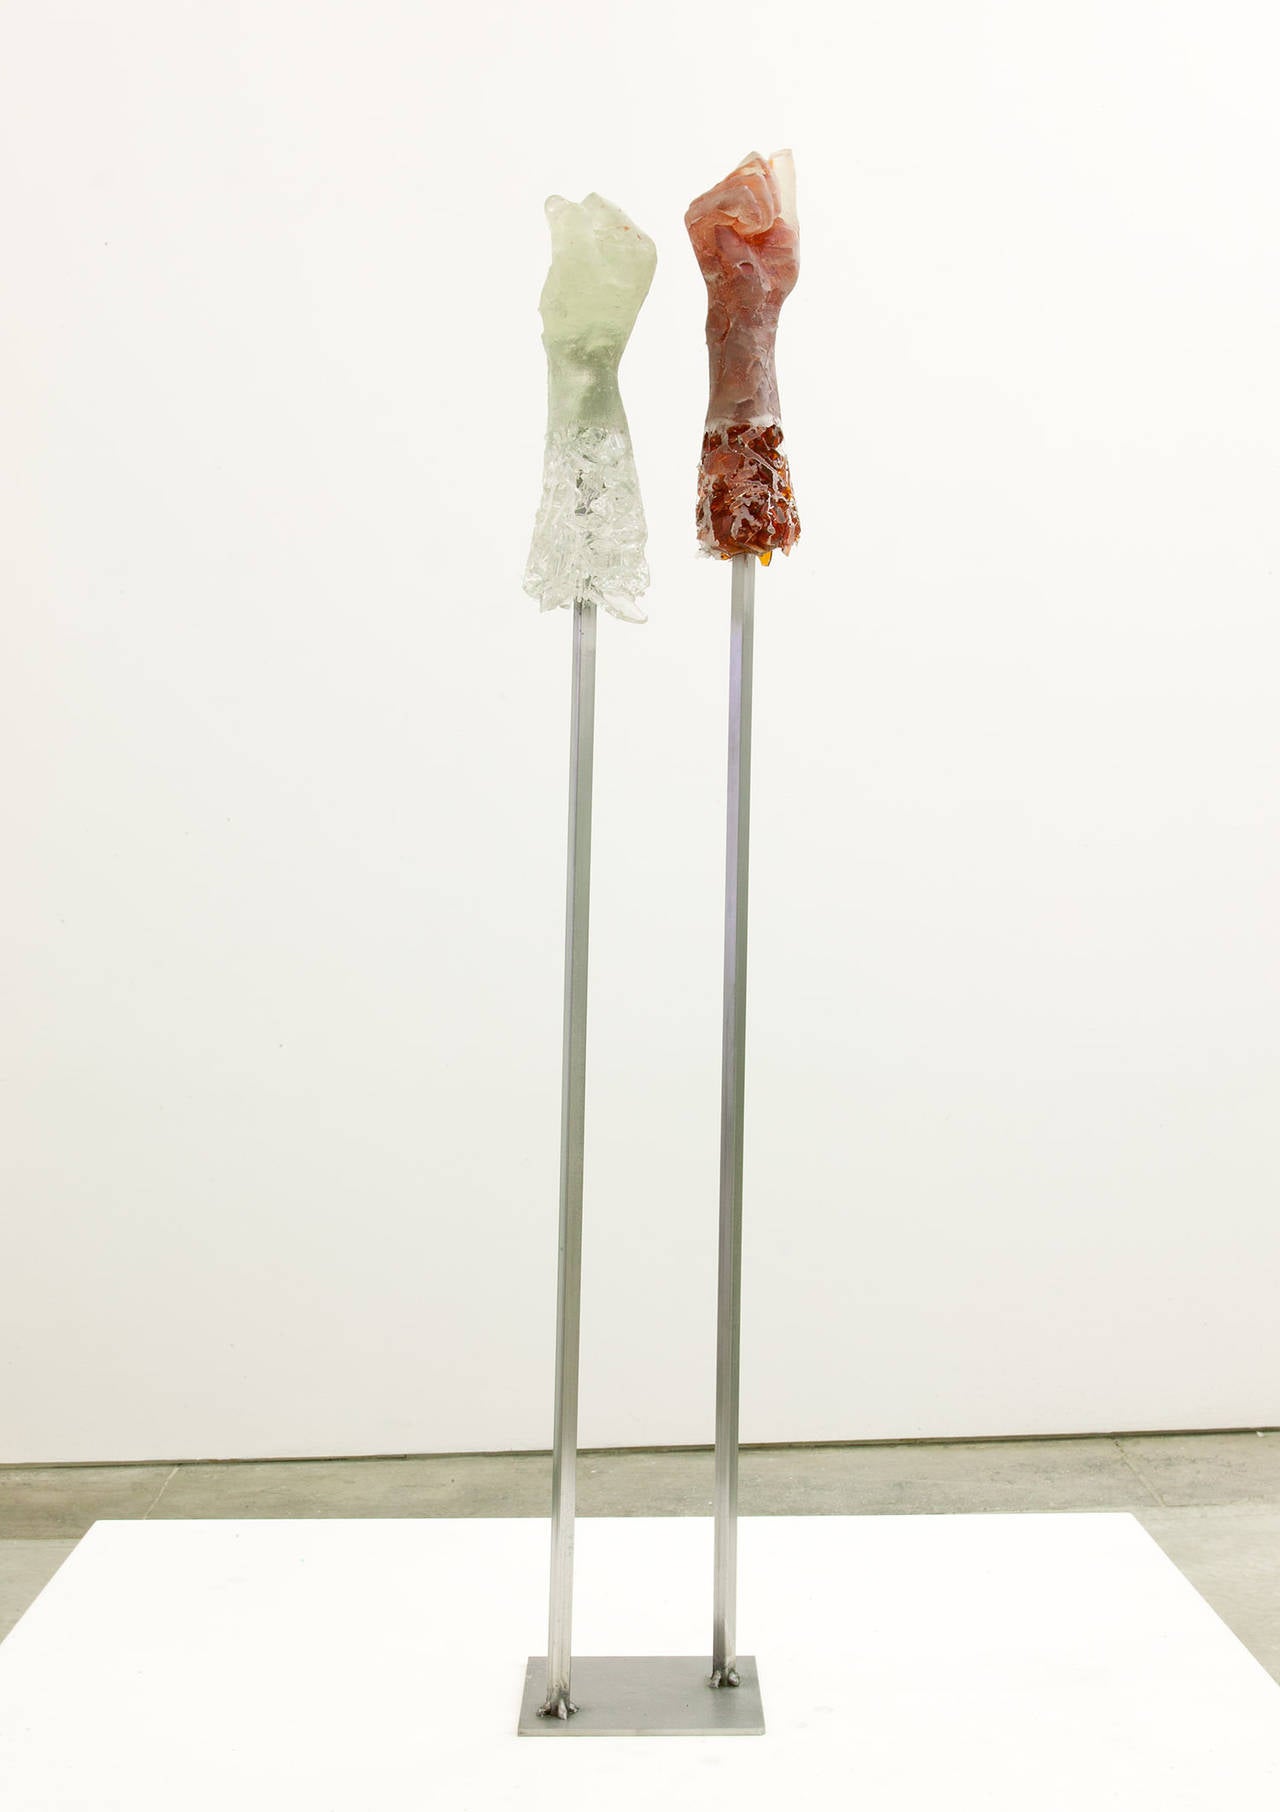 Owens is known for her sculpture made from recycled material, especially broken glass. This work is from her series of POPs. Broken bottle glass was cast in molds made from several different women, and the hands are mounted on lifts as in a